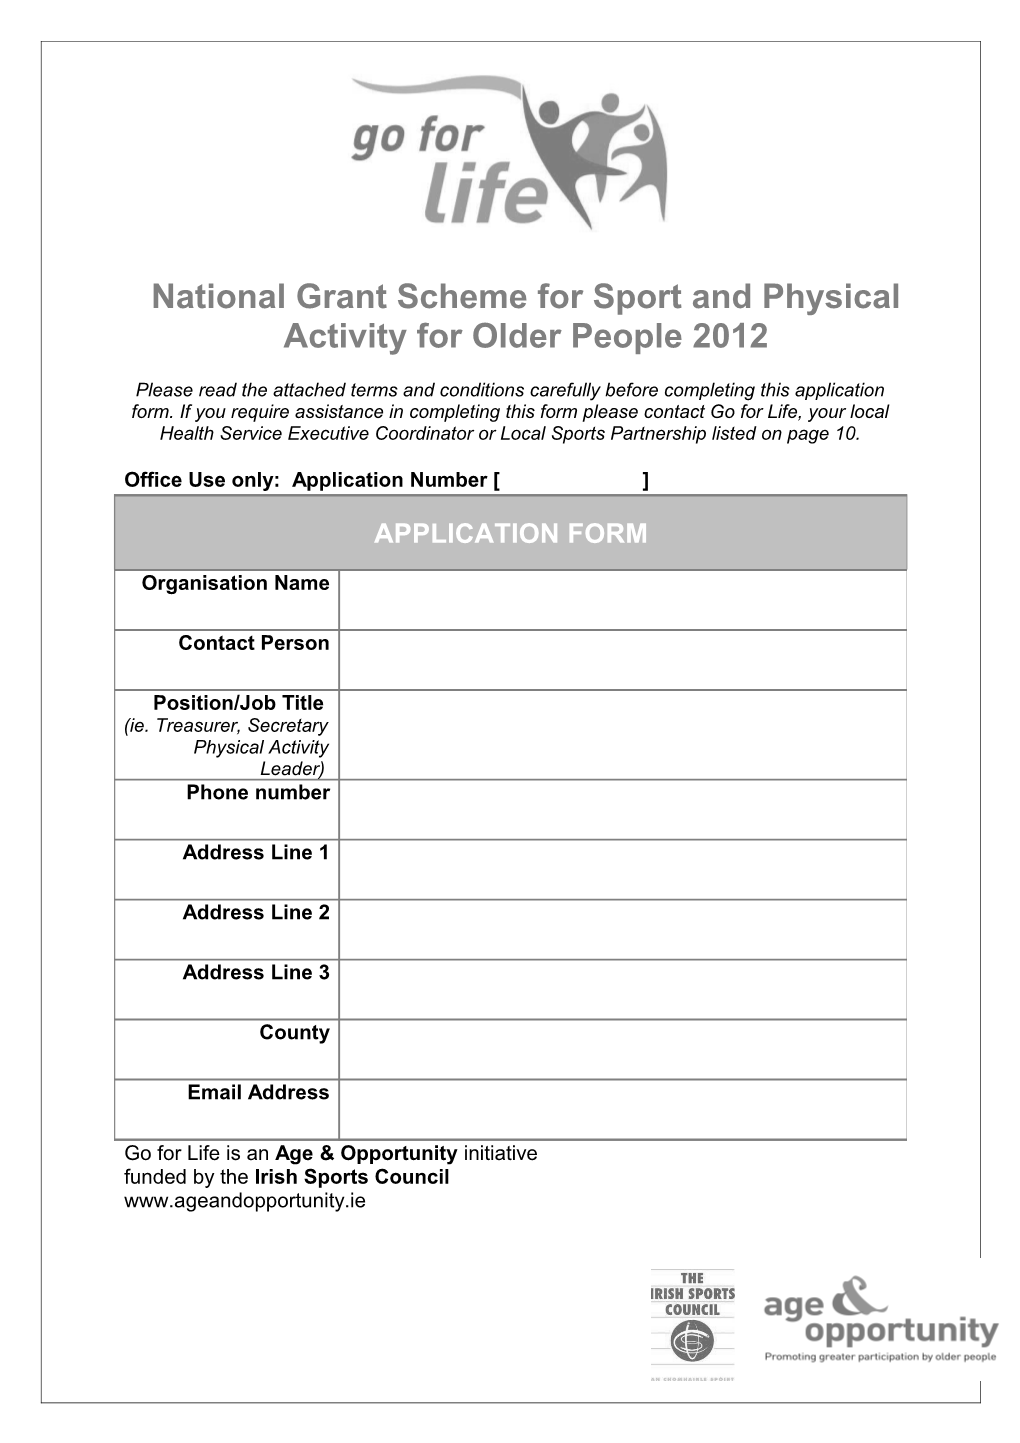 The National Grant Scheme